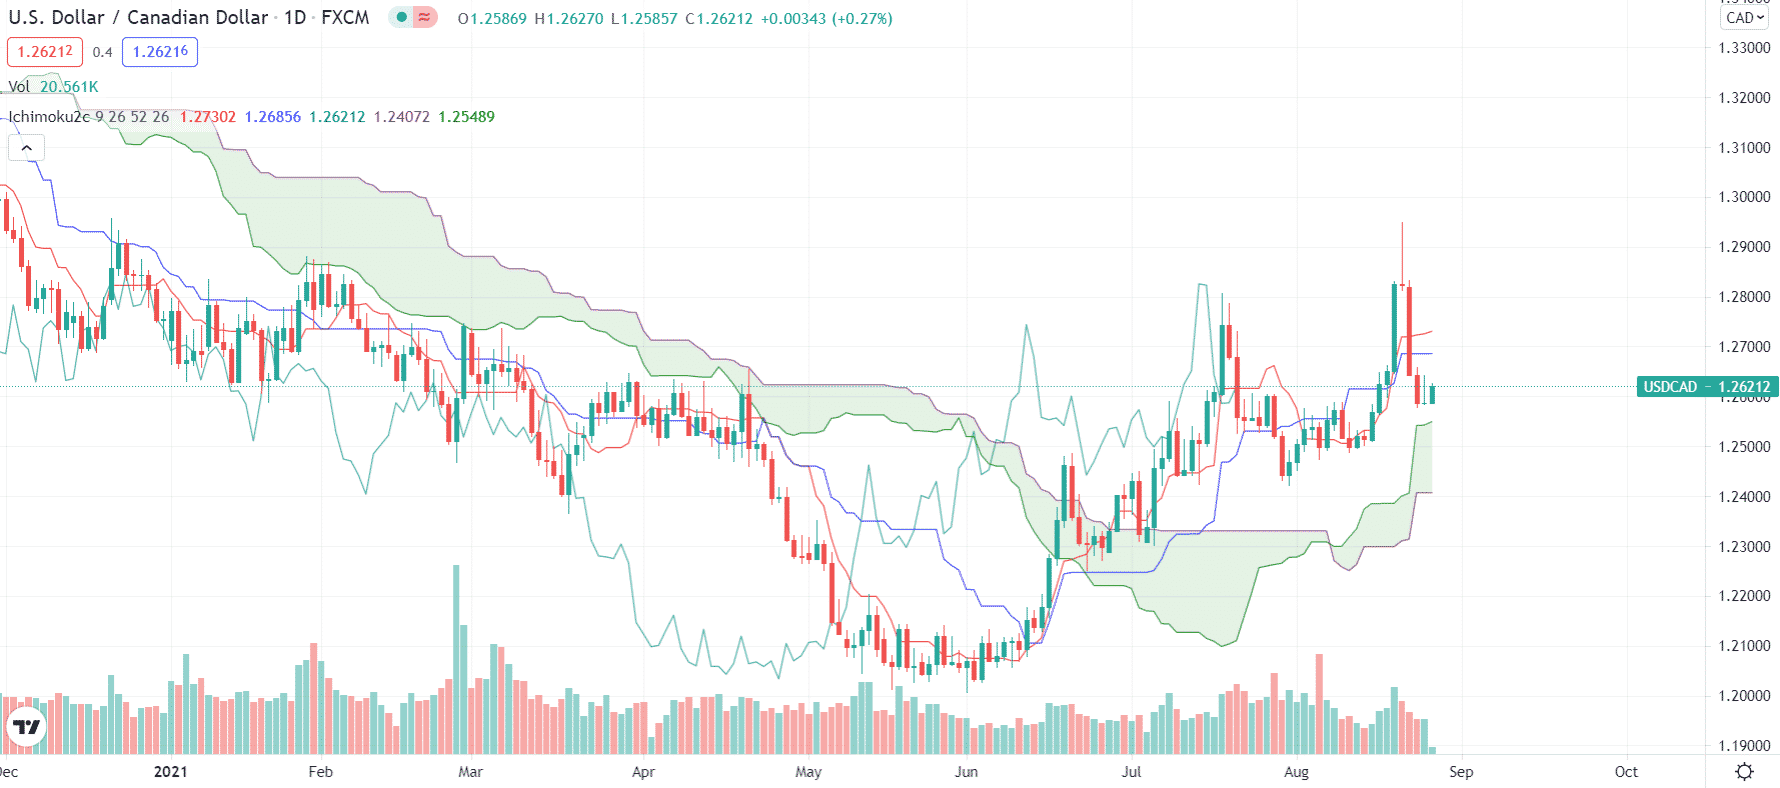 Ichimoku trading system on the chart